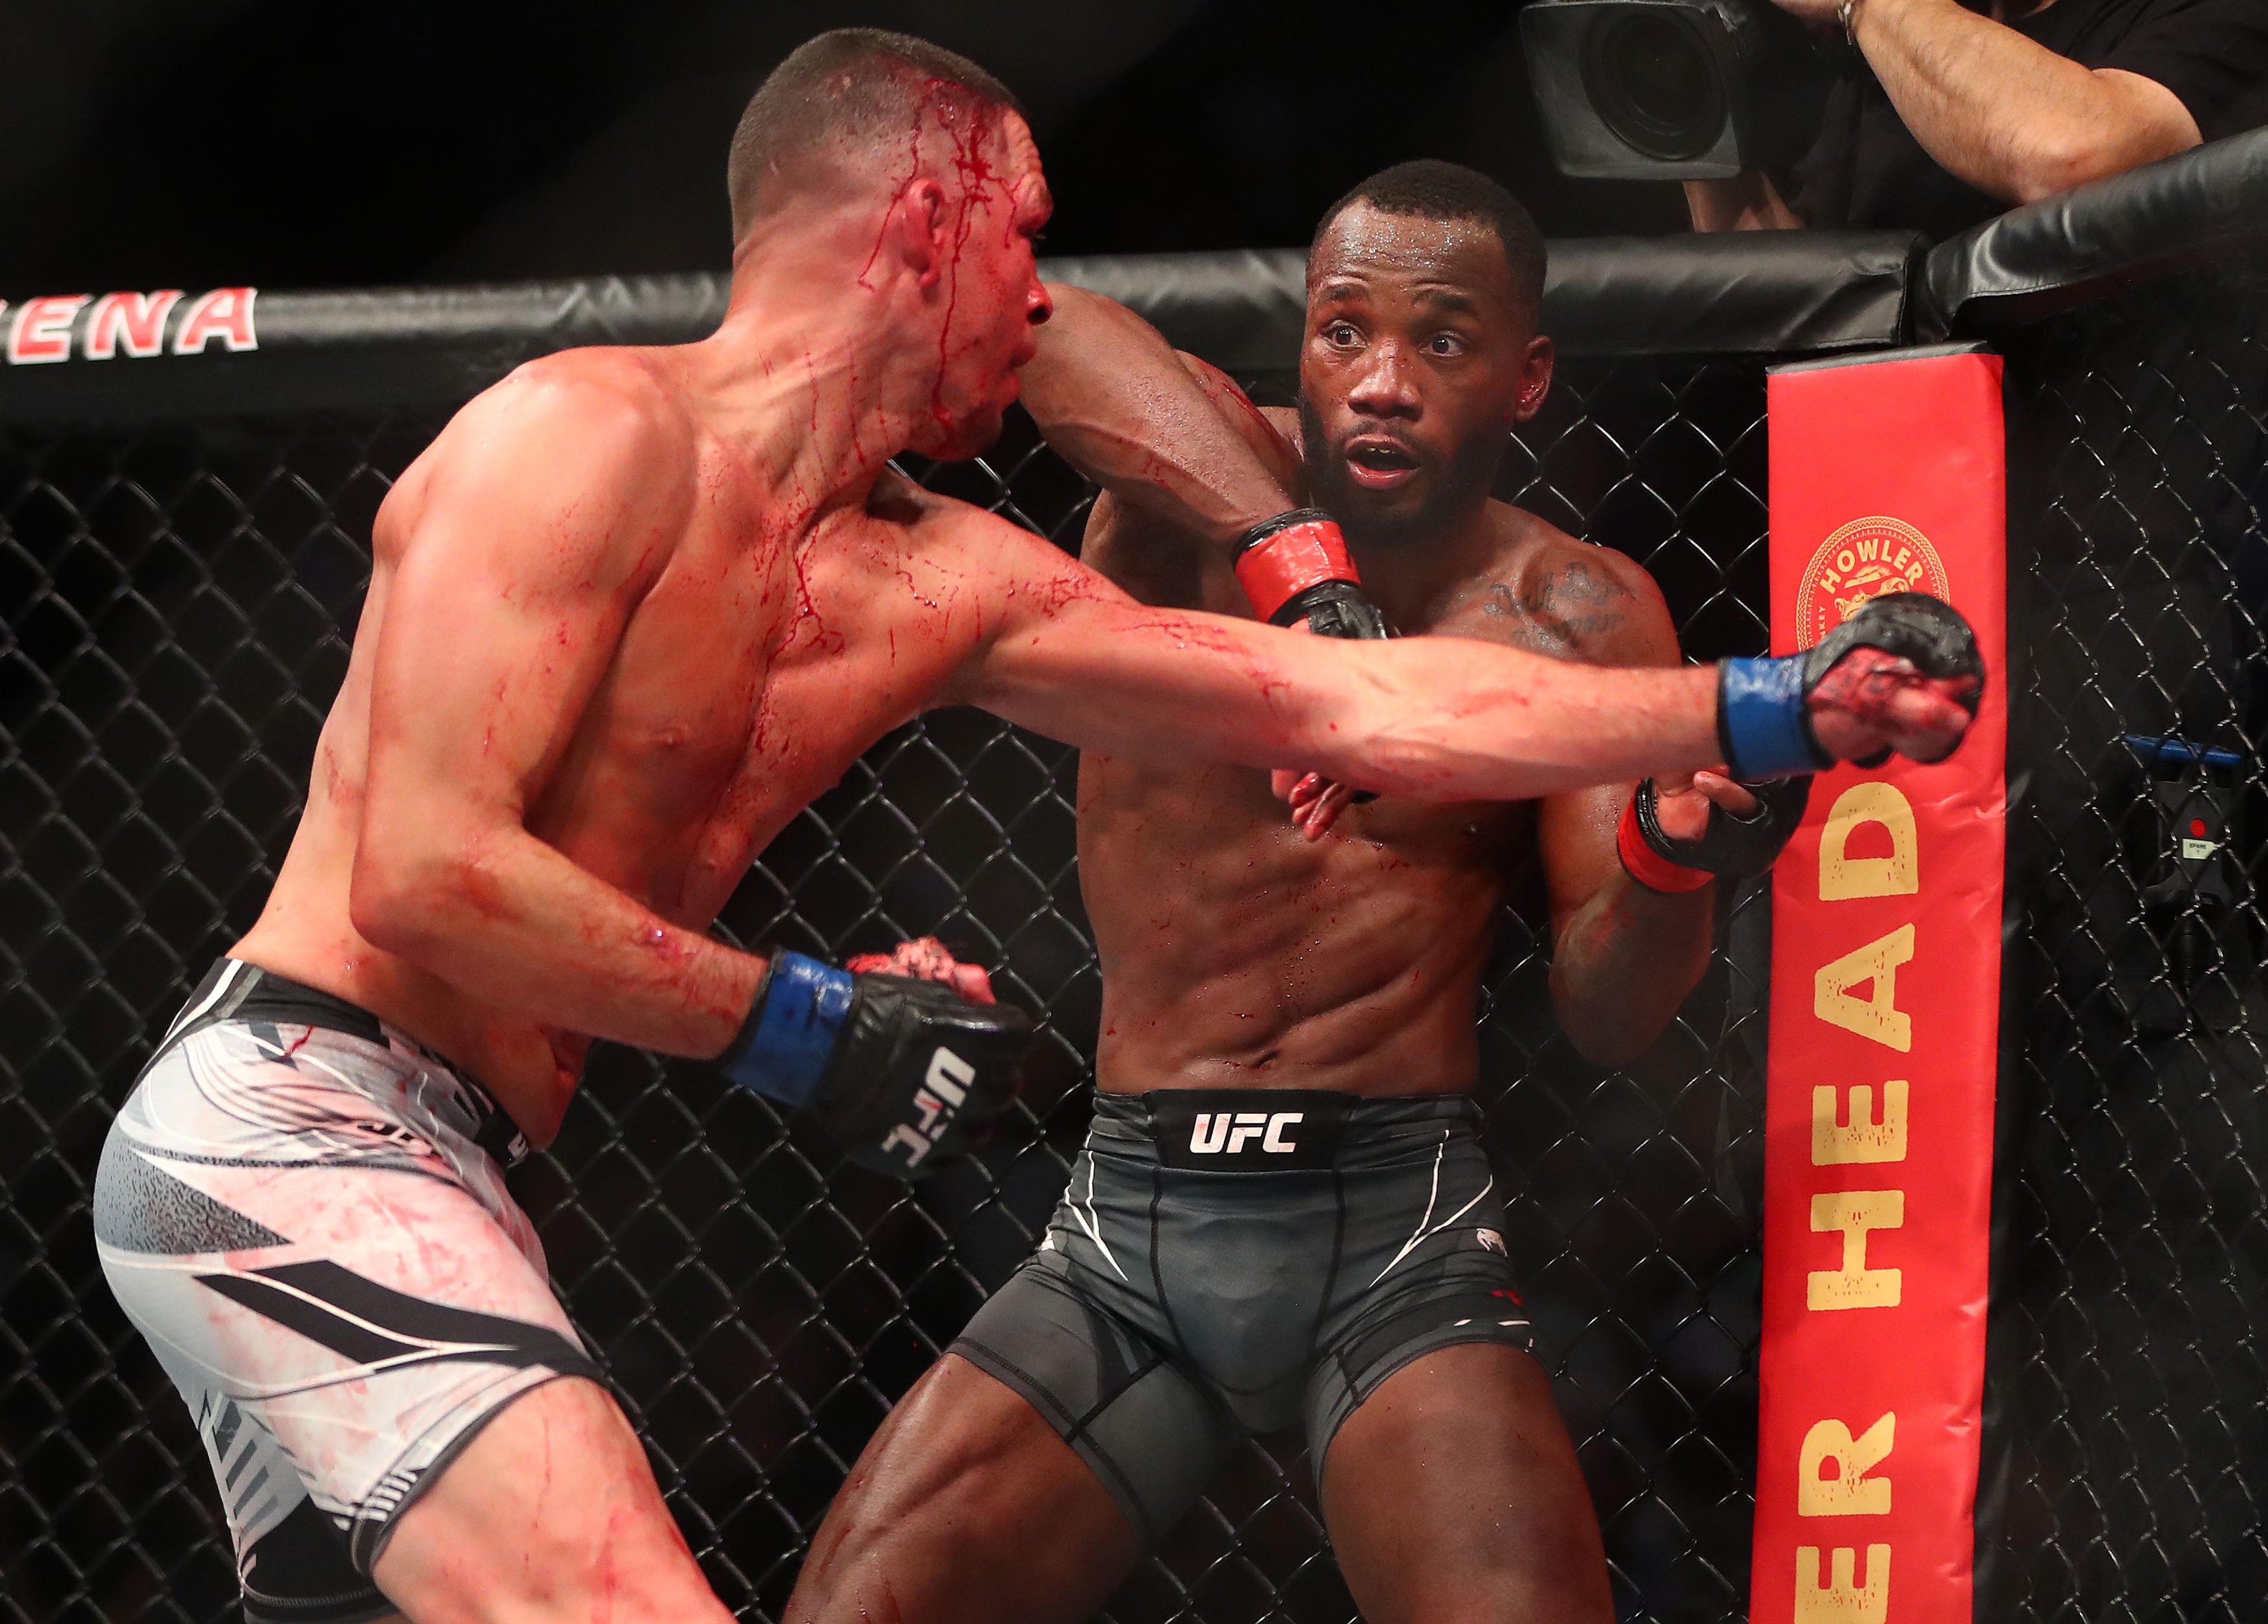 Leon Edwards (right) outpointed Nate Diaz last time out